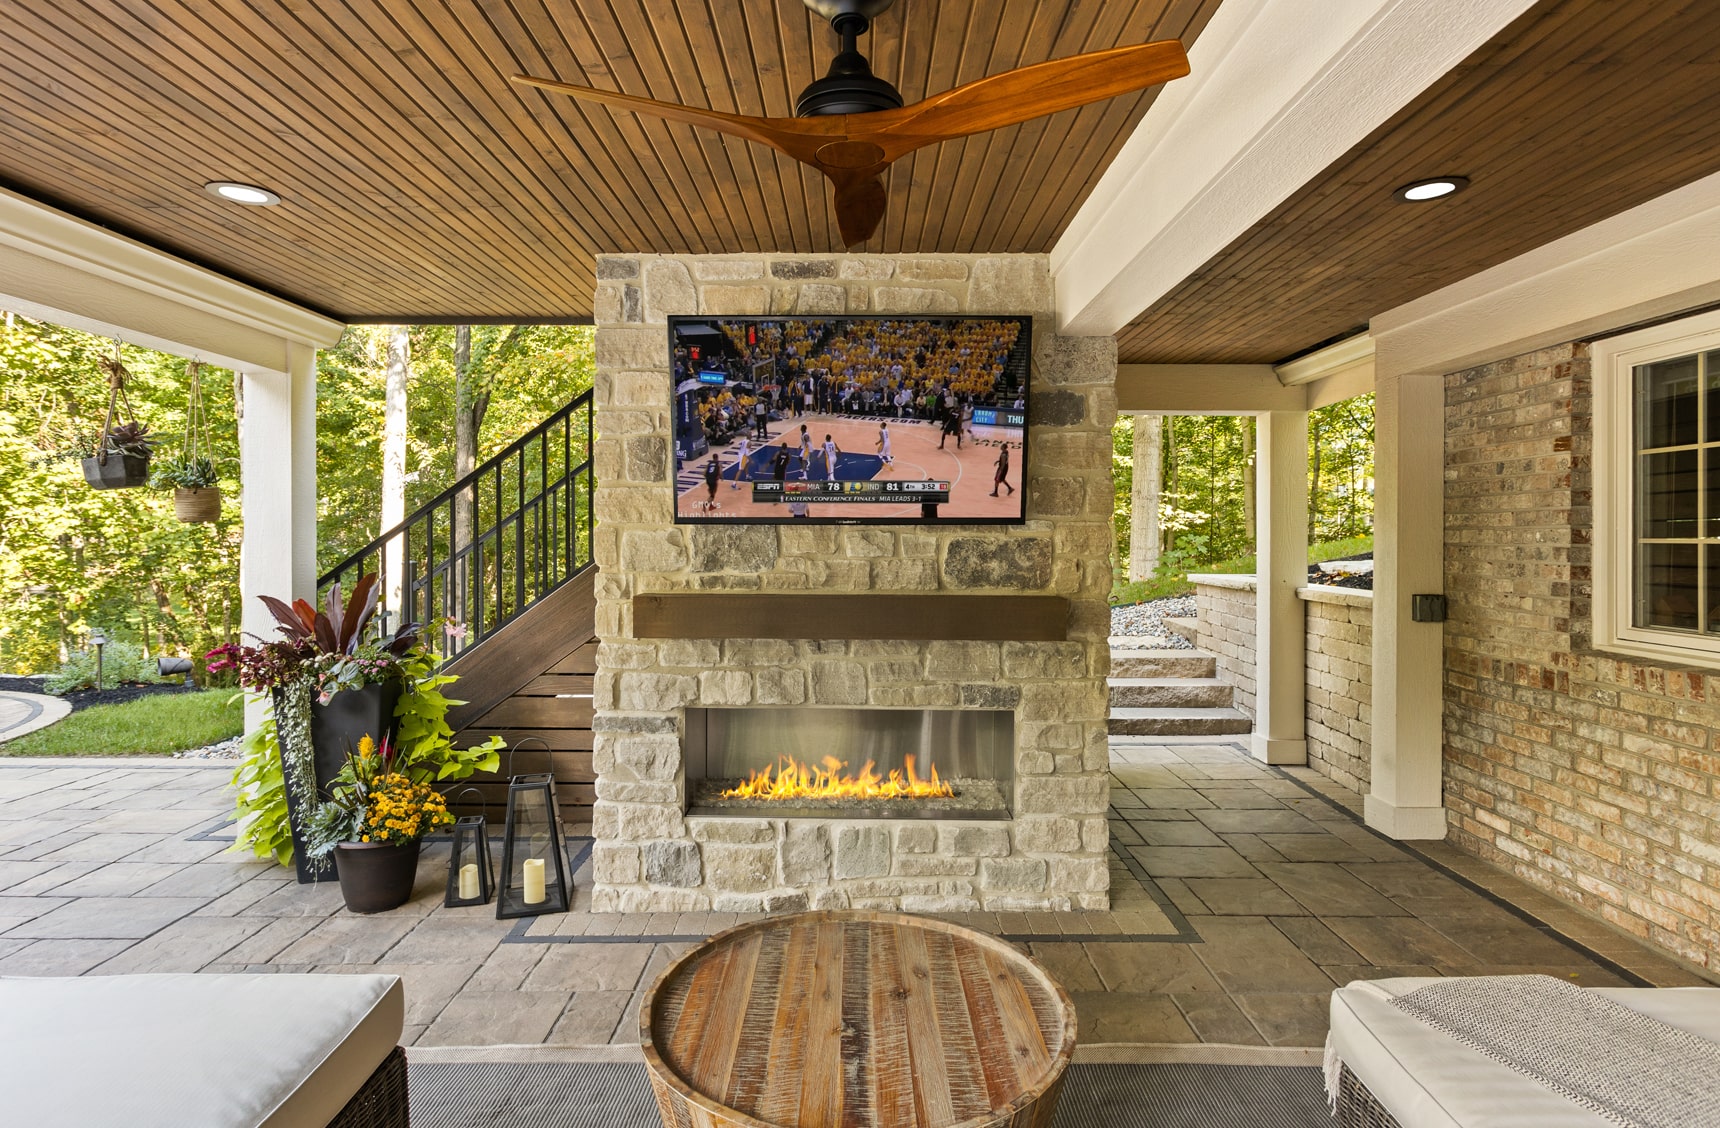 BPI outdoor living space with TV and fireplace